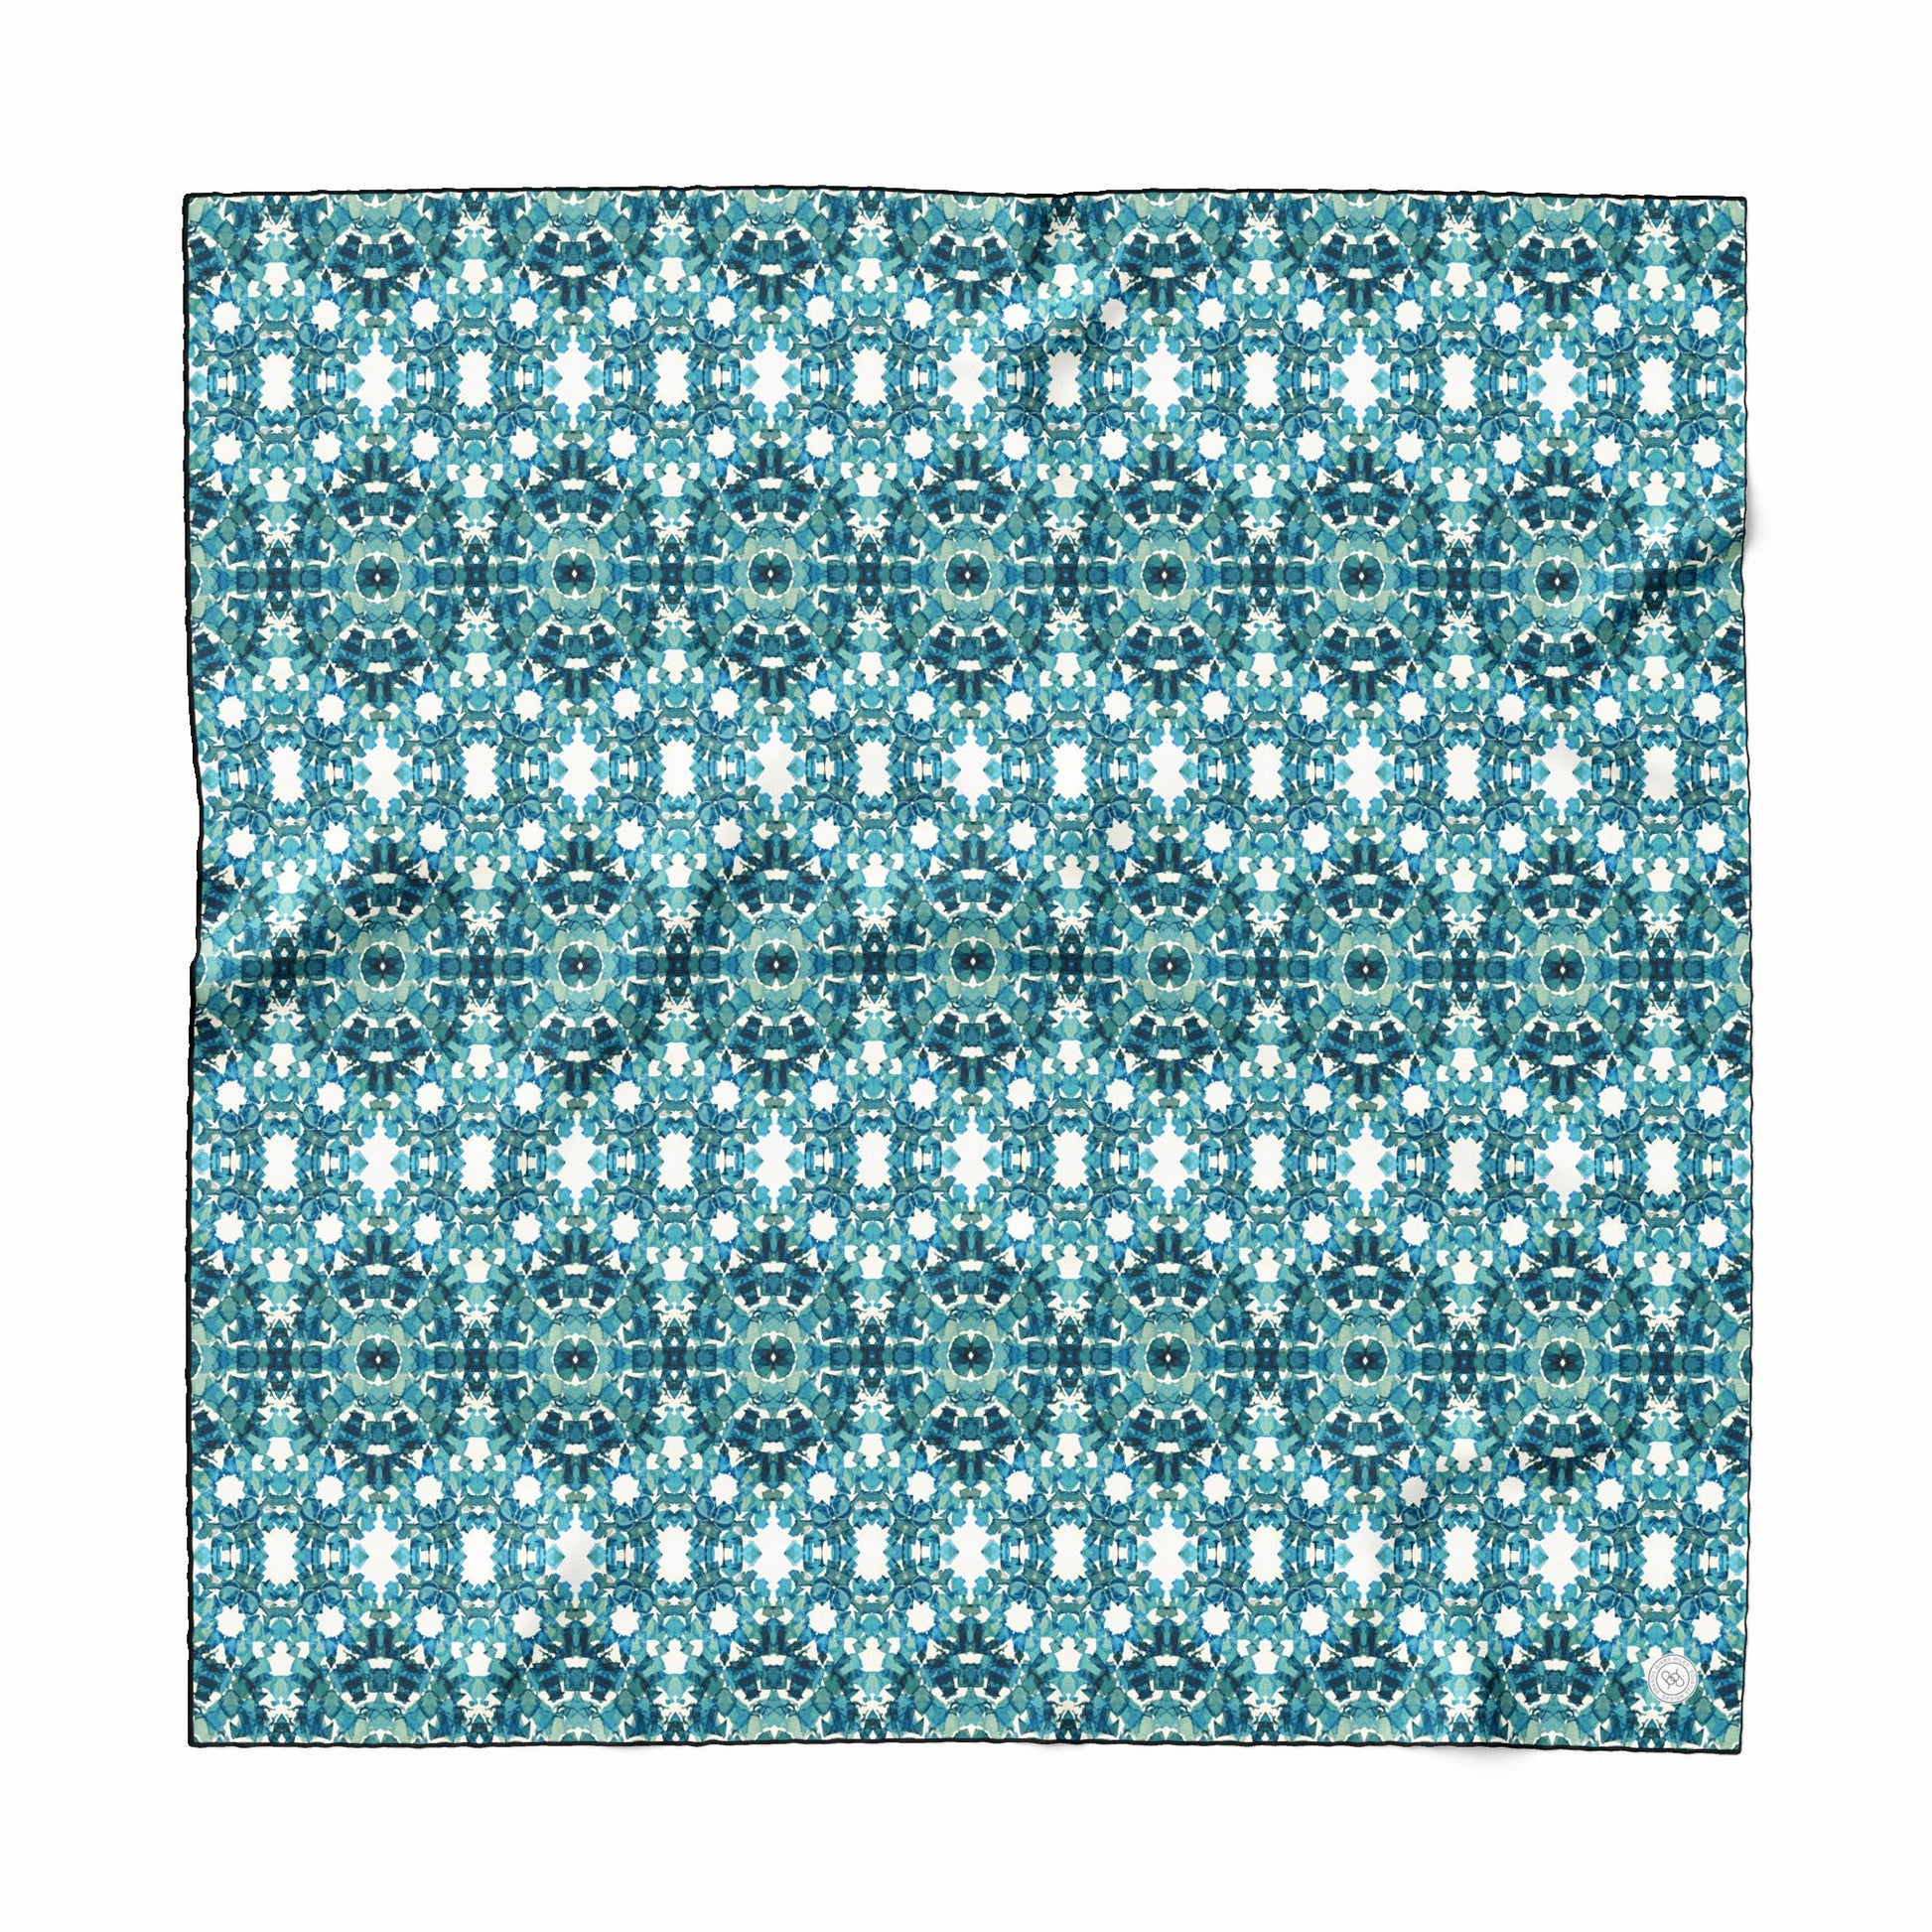 36x36 inch silk habotai scarf featuring a hand-painted pattern in teal, blue, and green tones.